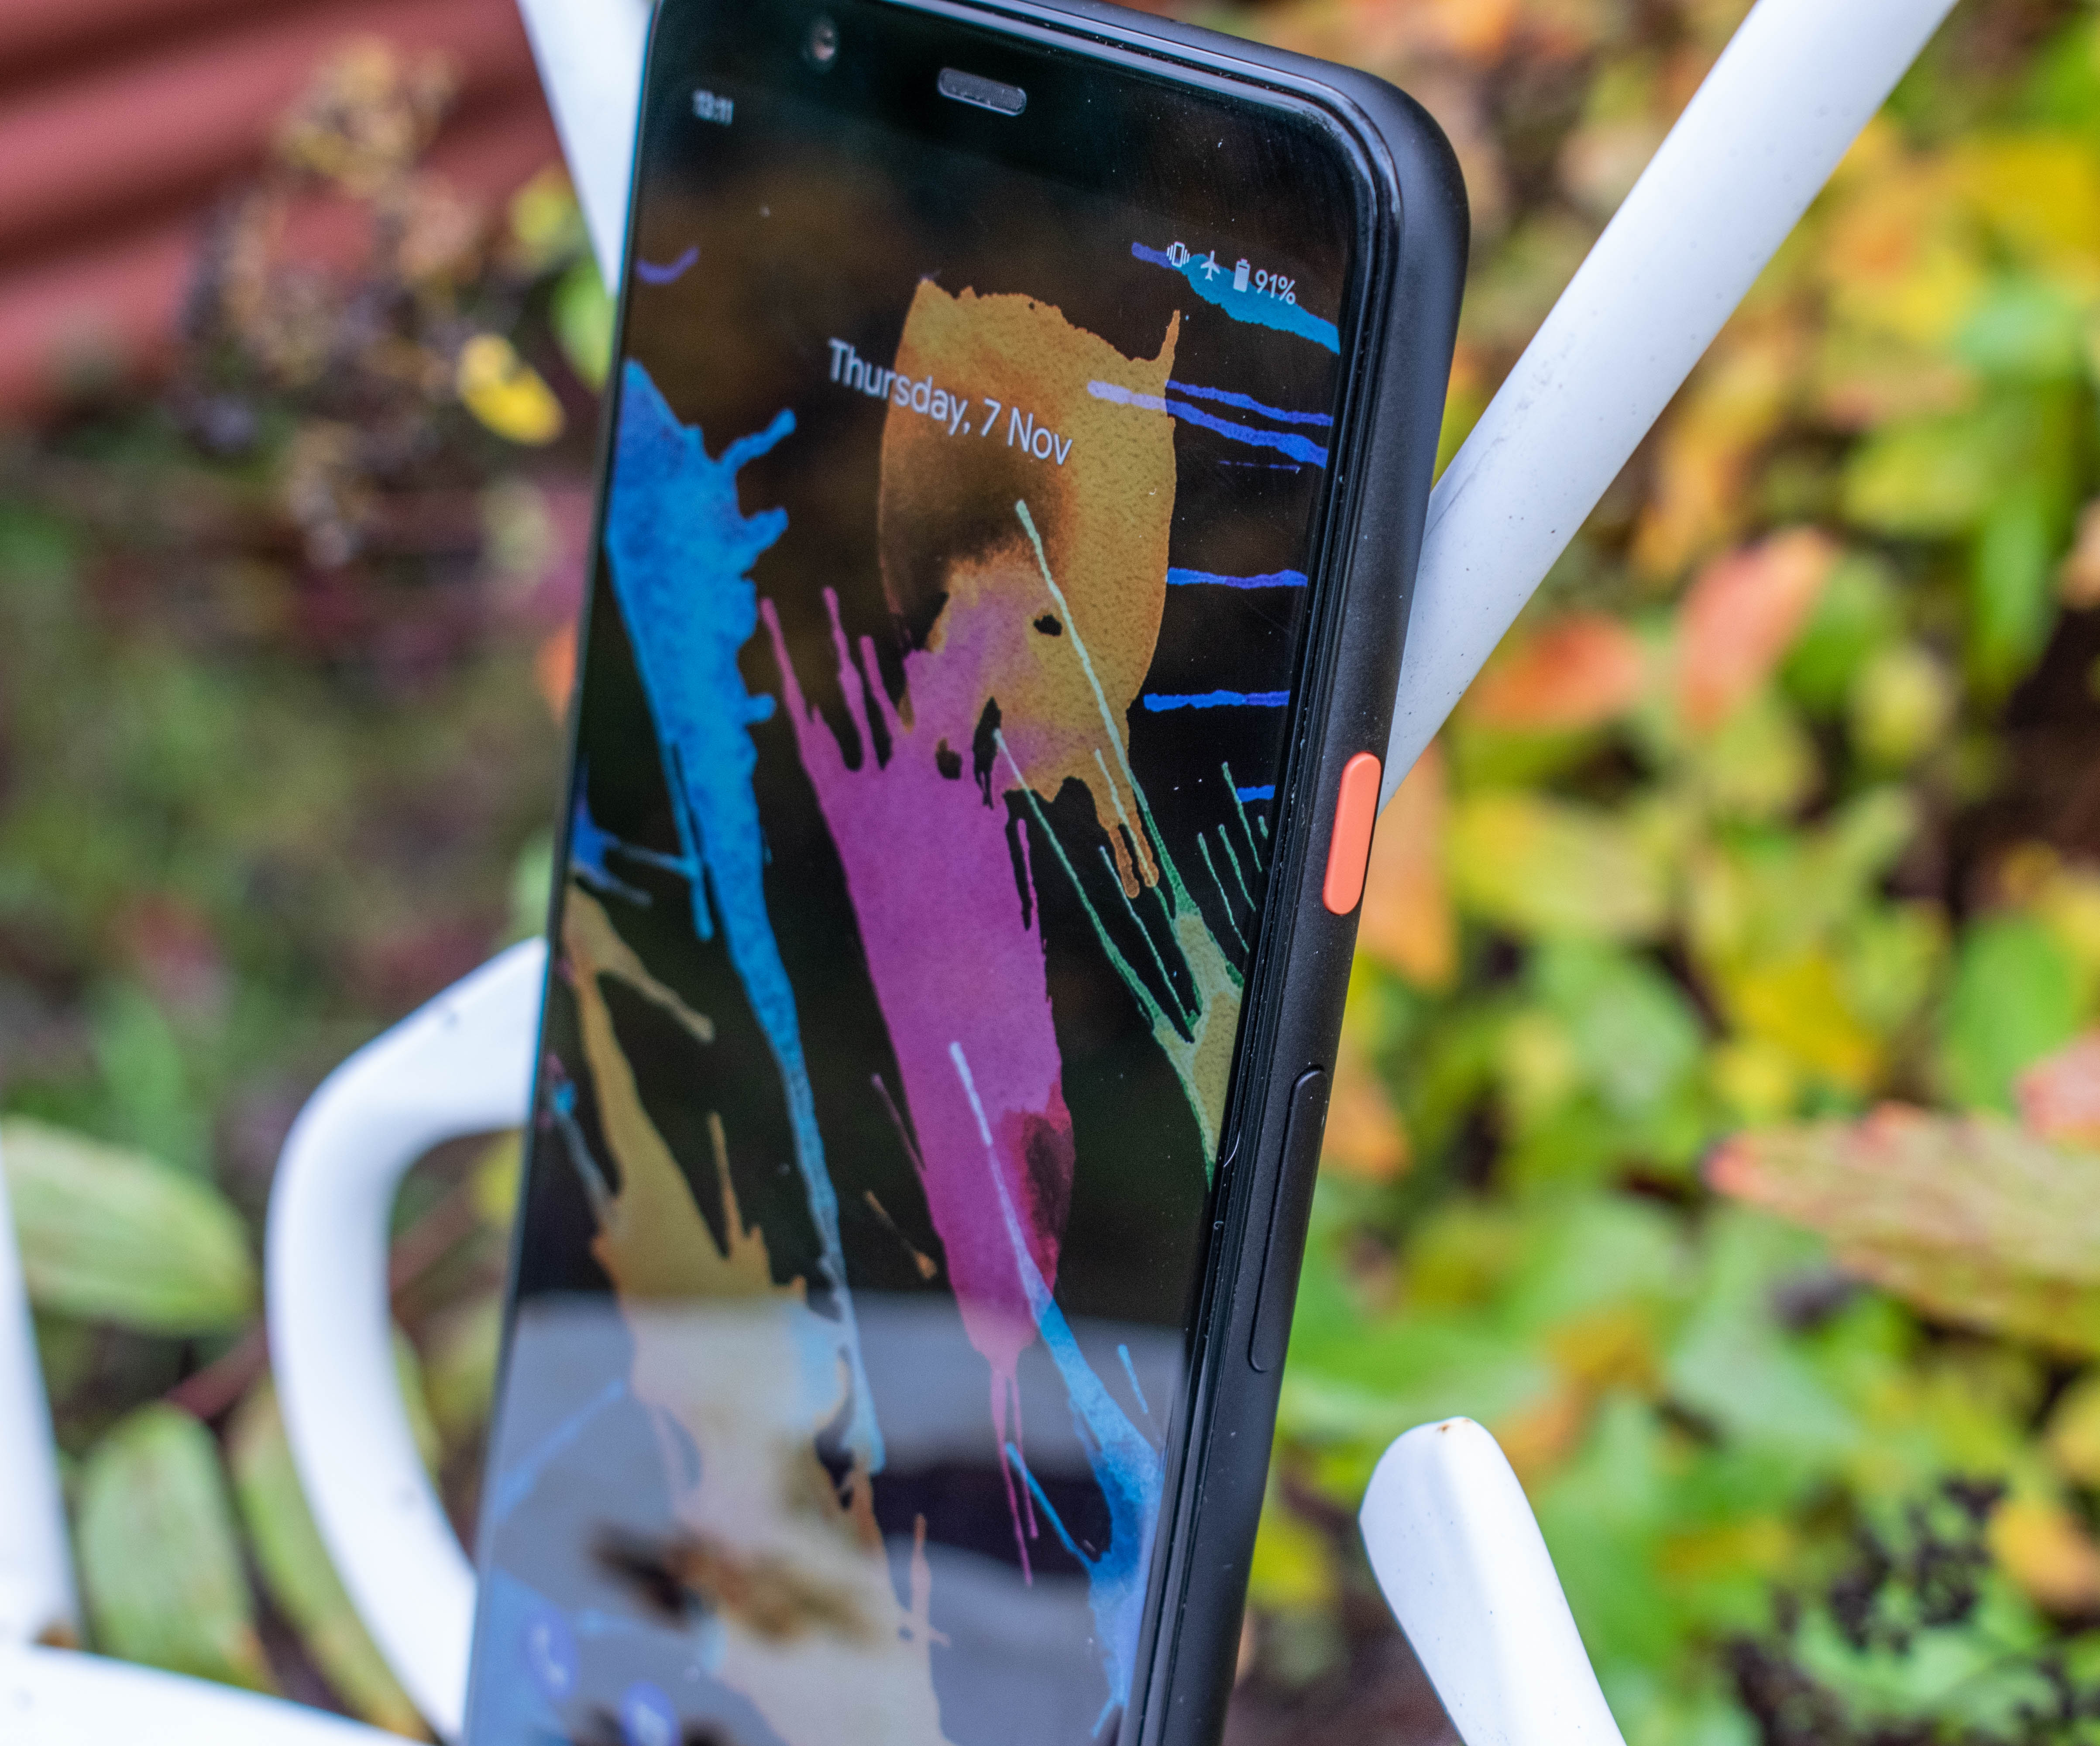 Google Pixel 4 XL review: Untapped potential - Android Authority